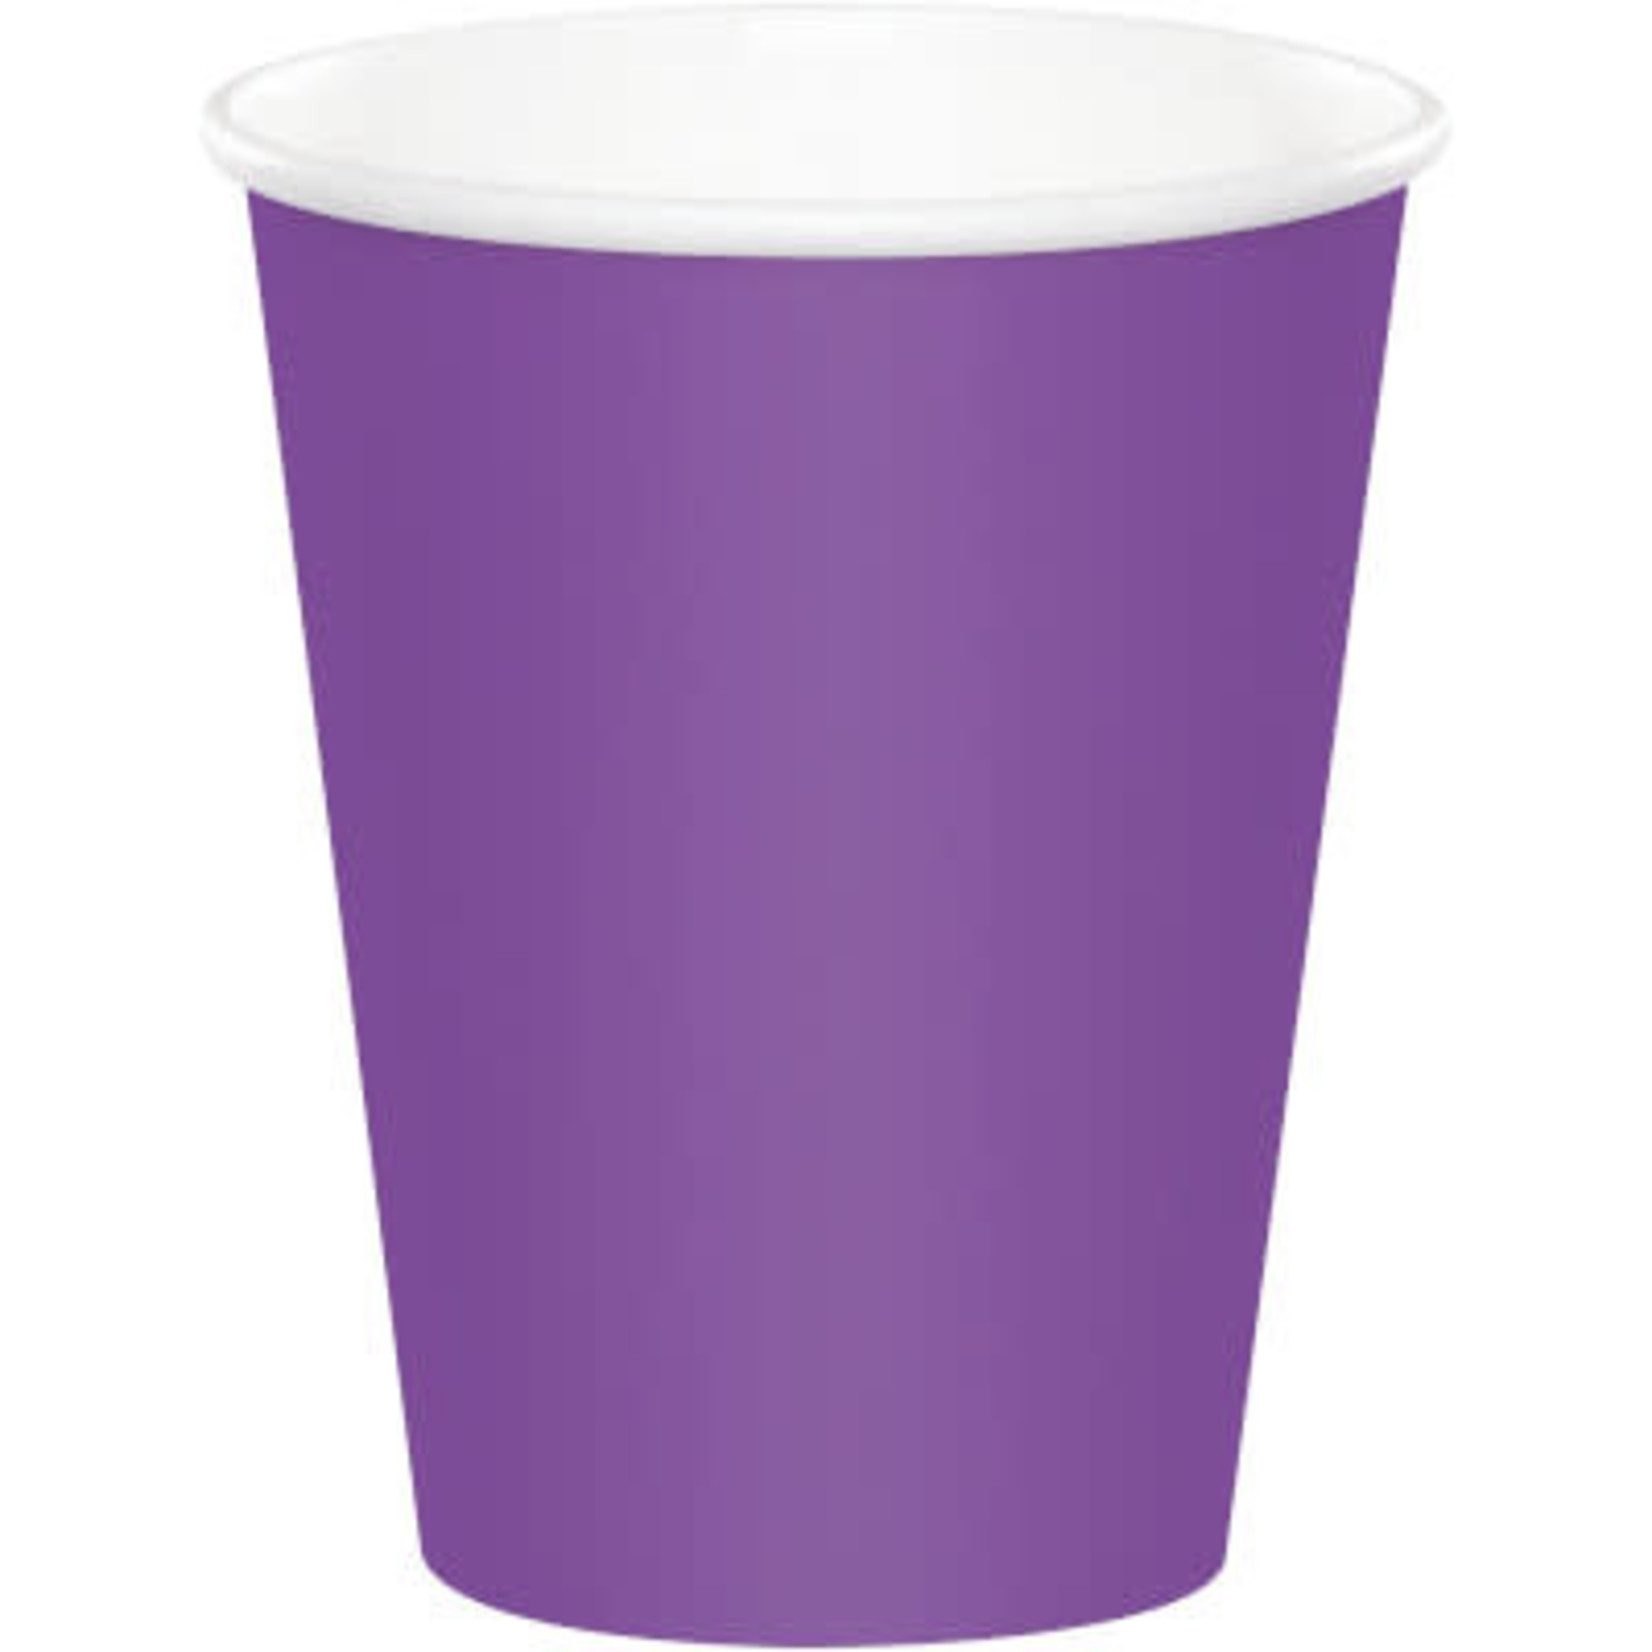 Touch of Color 9oz. Amethyst Purple Hot/Cold Paper Cups - 24ct.